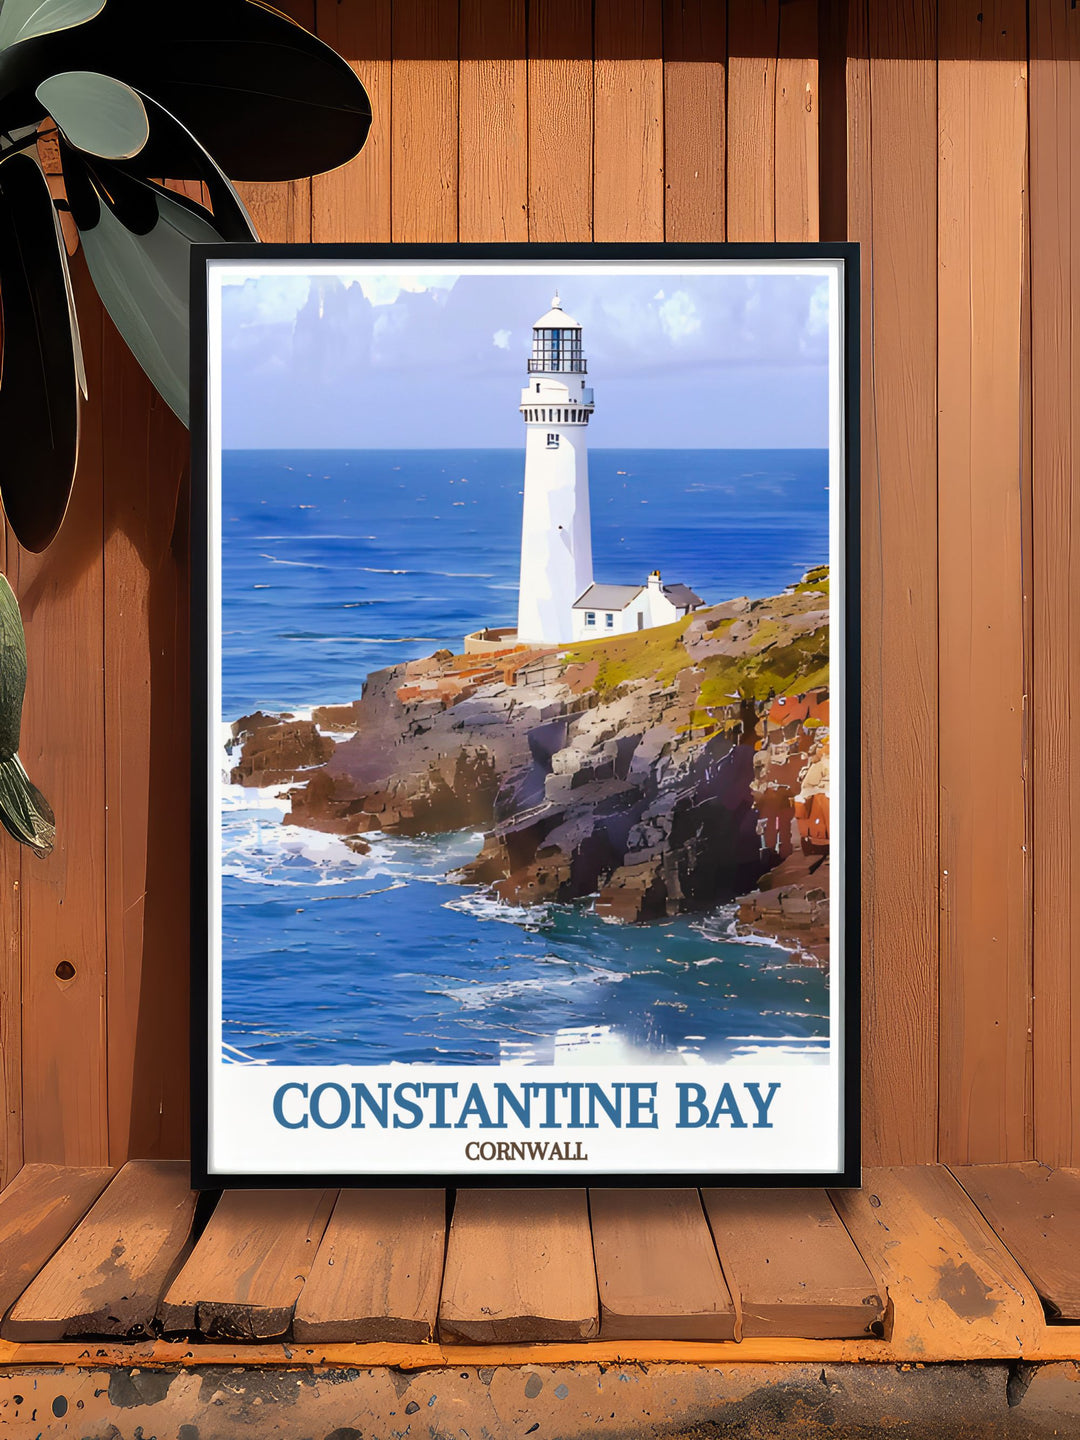 Capture the essence of Cornwalls coastline with our detailed art prints, showcasing the beauty of Constantine Bay and Trevose Head Lighthouse. The golden sands, clear waters, and historic lighthouse provide a perfect backdrop for a relaxing and memorable experience.